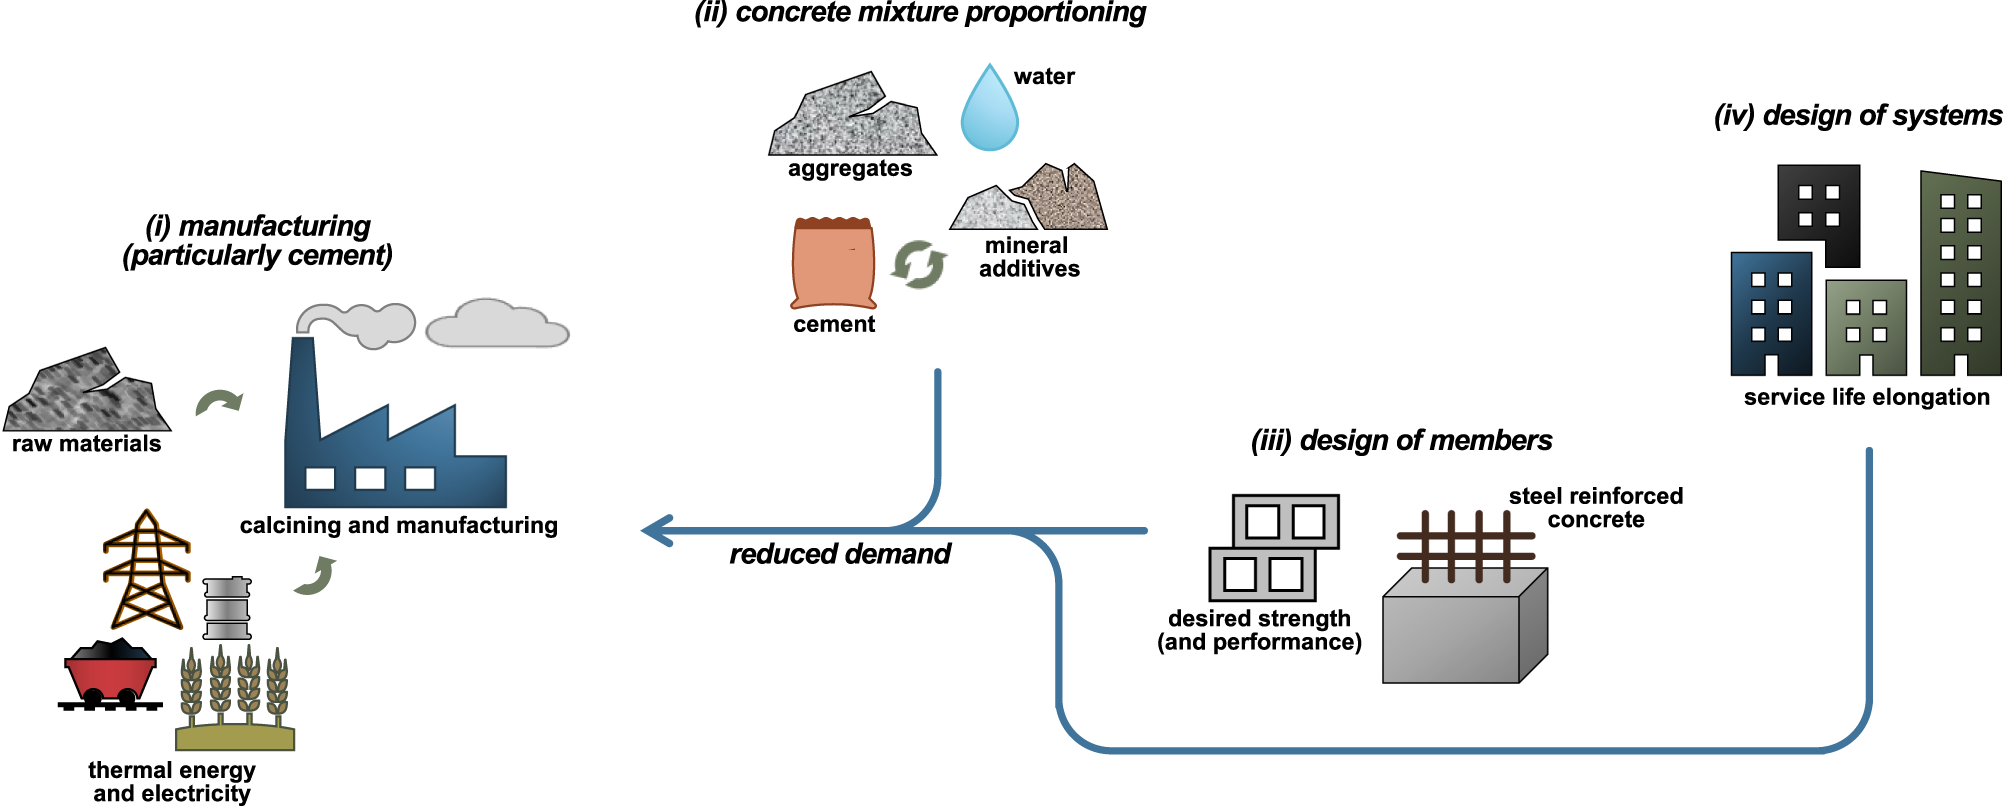 Near-term pathways for decarbonizing global concrete production